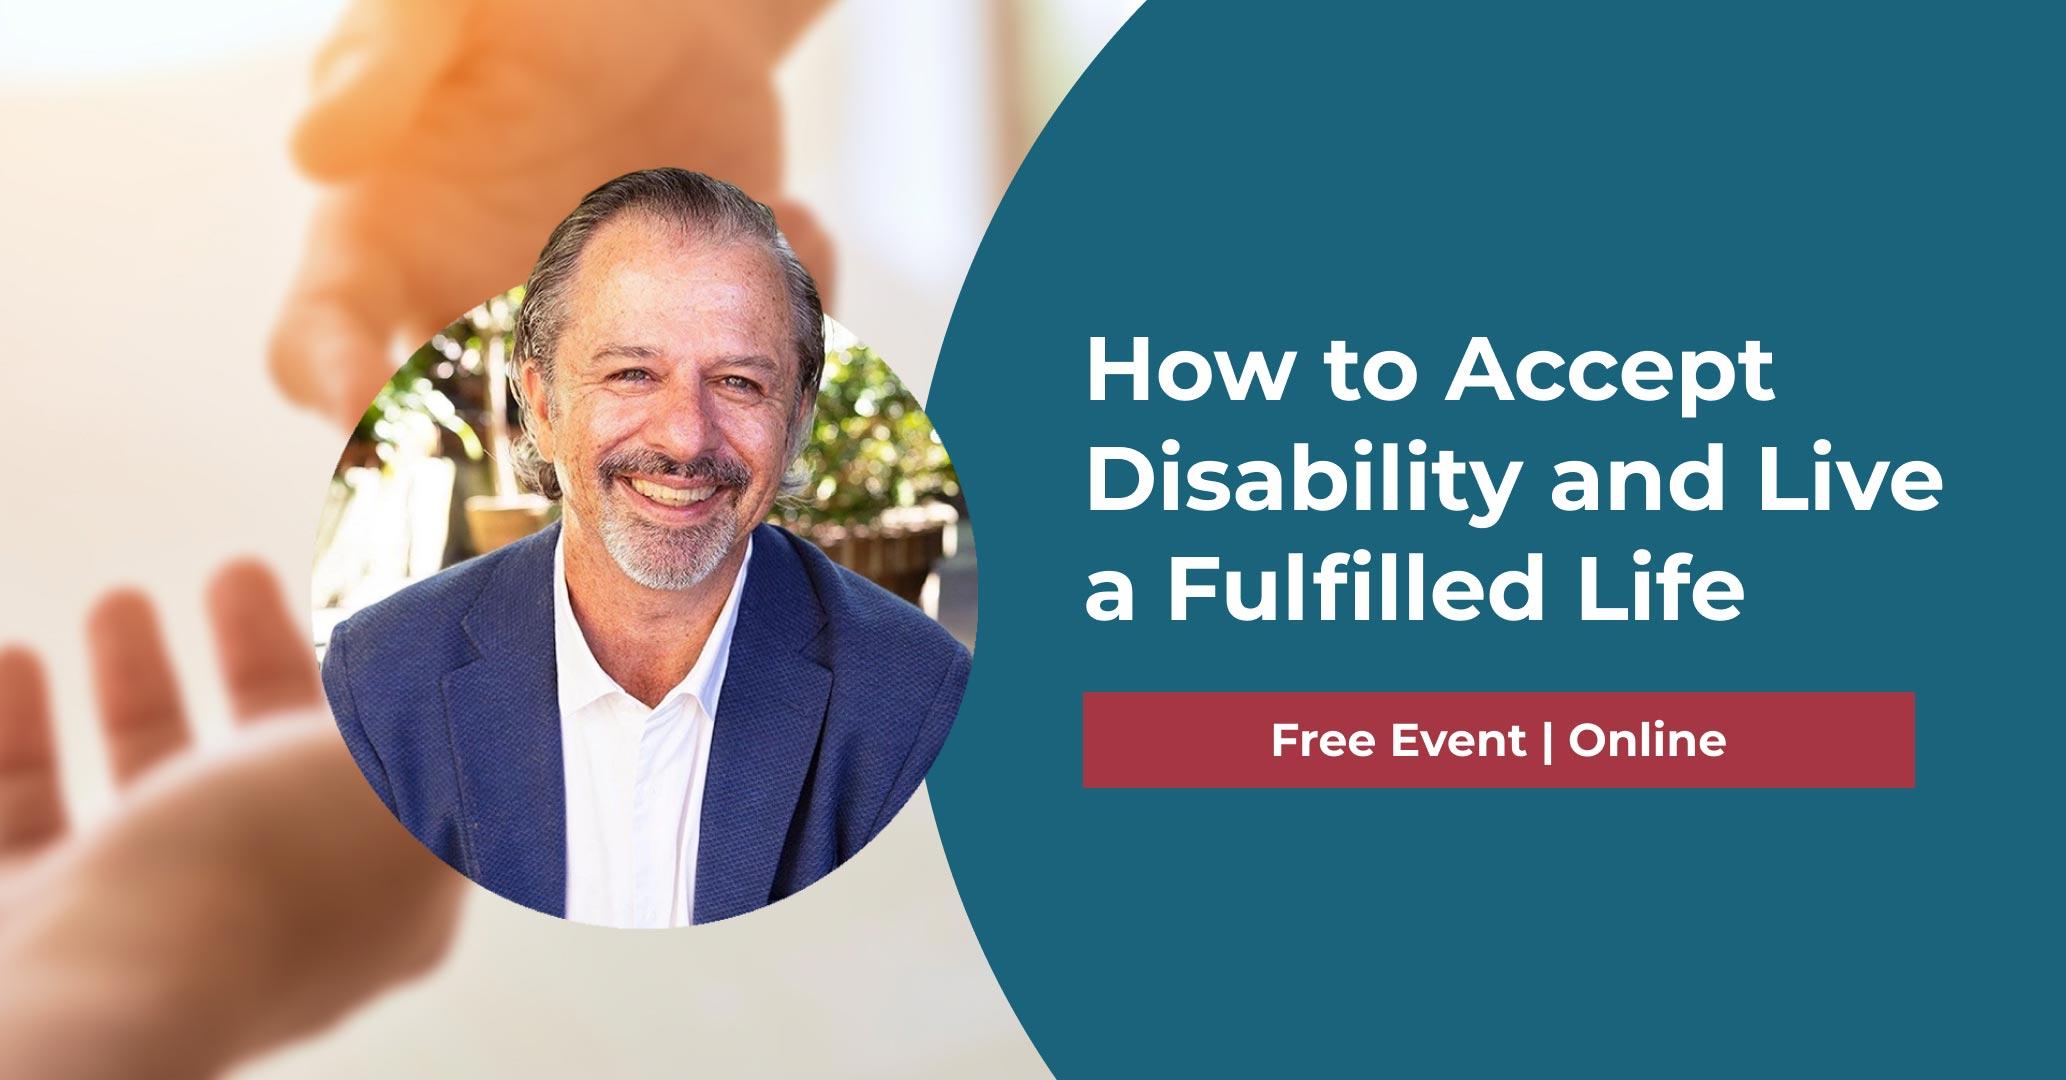 Accepting Disability for a Fulfilled Life